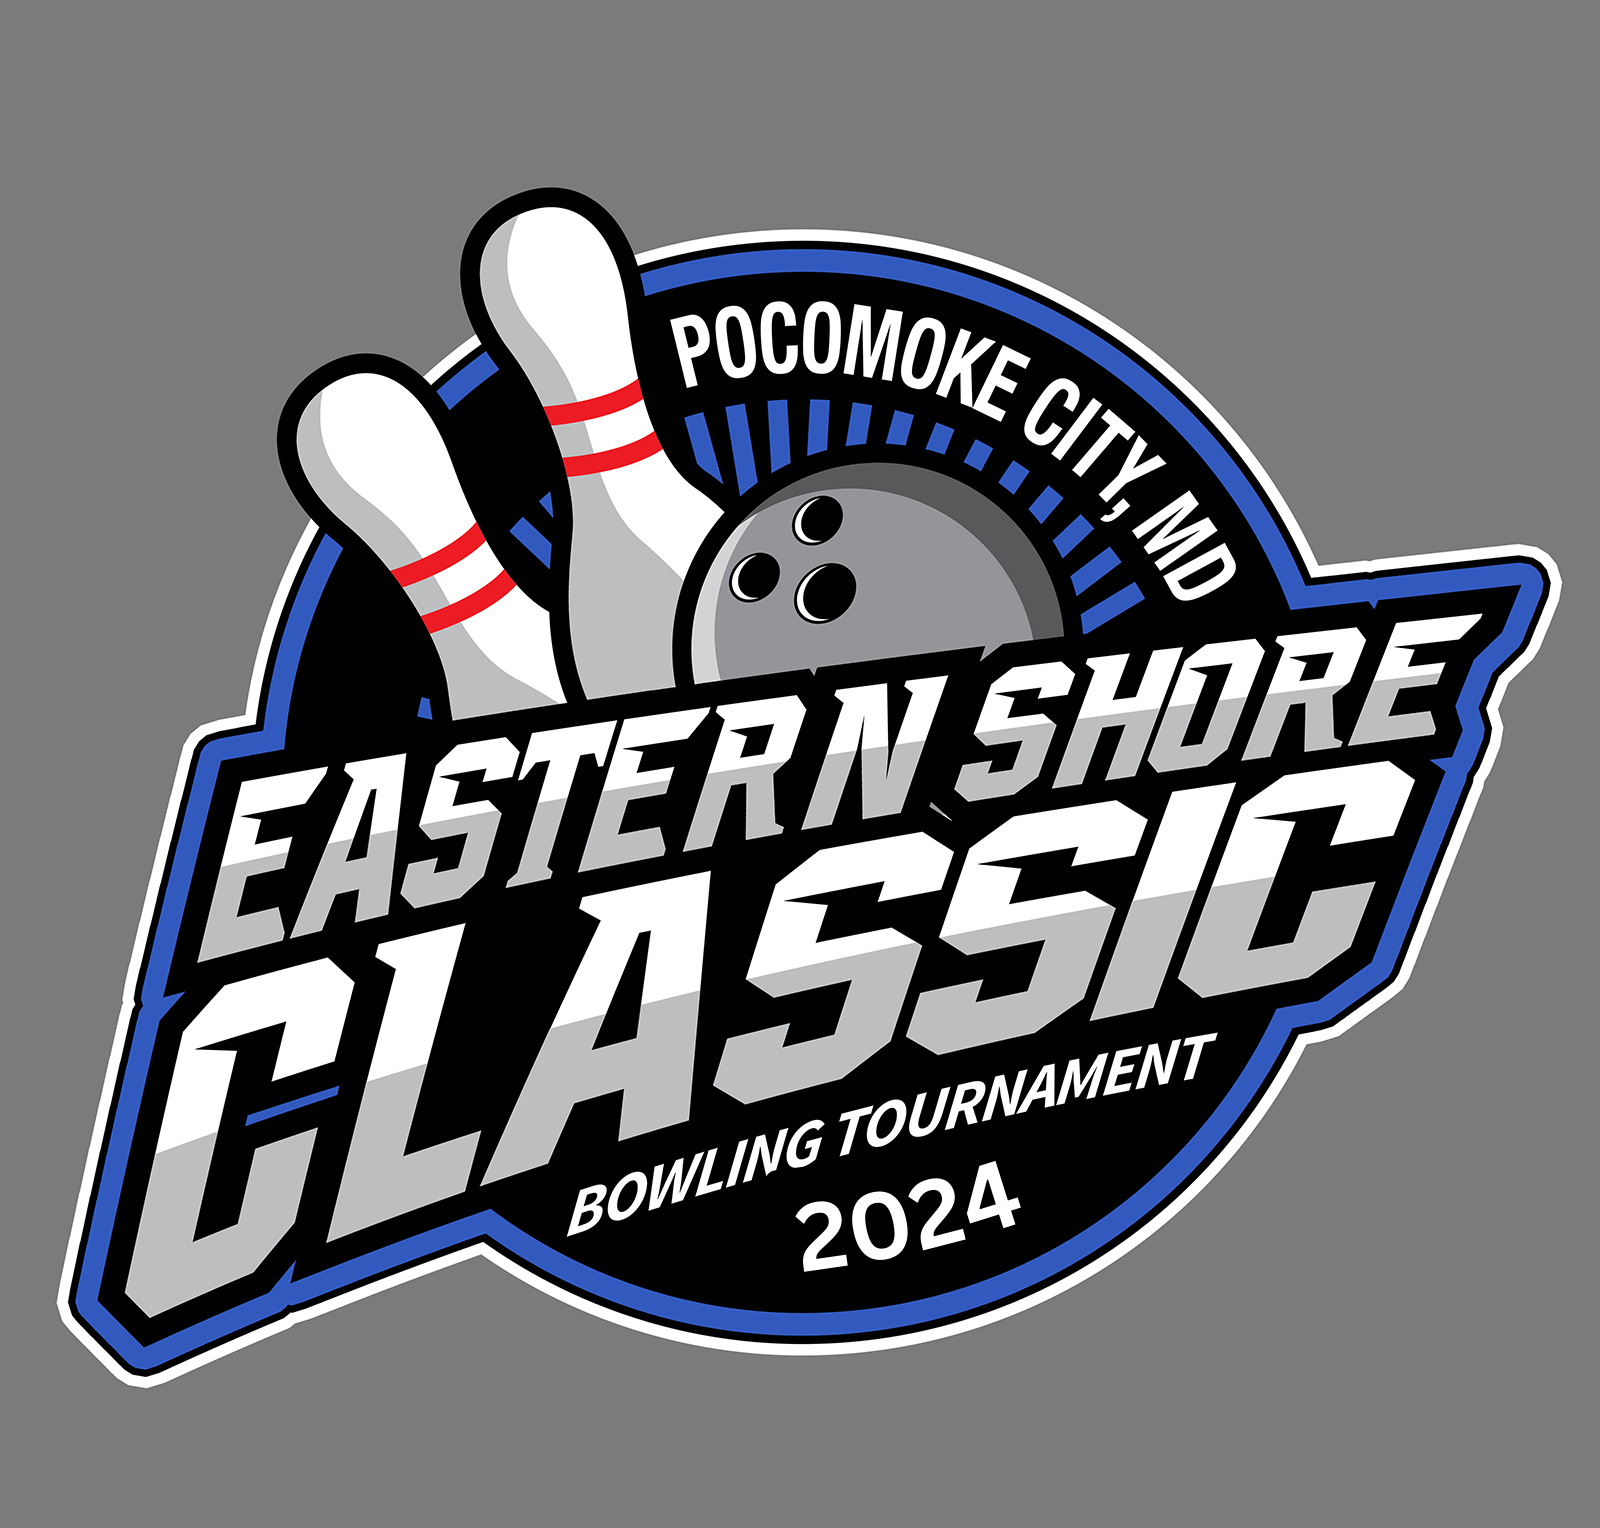 2nd Annual Eastern Shore Classic